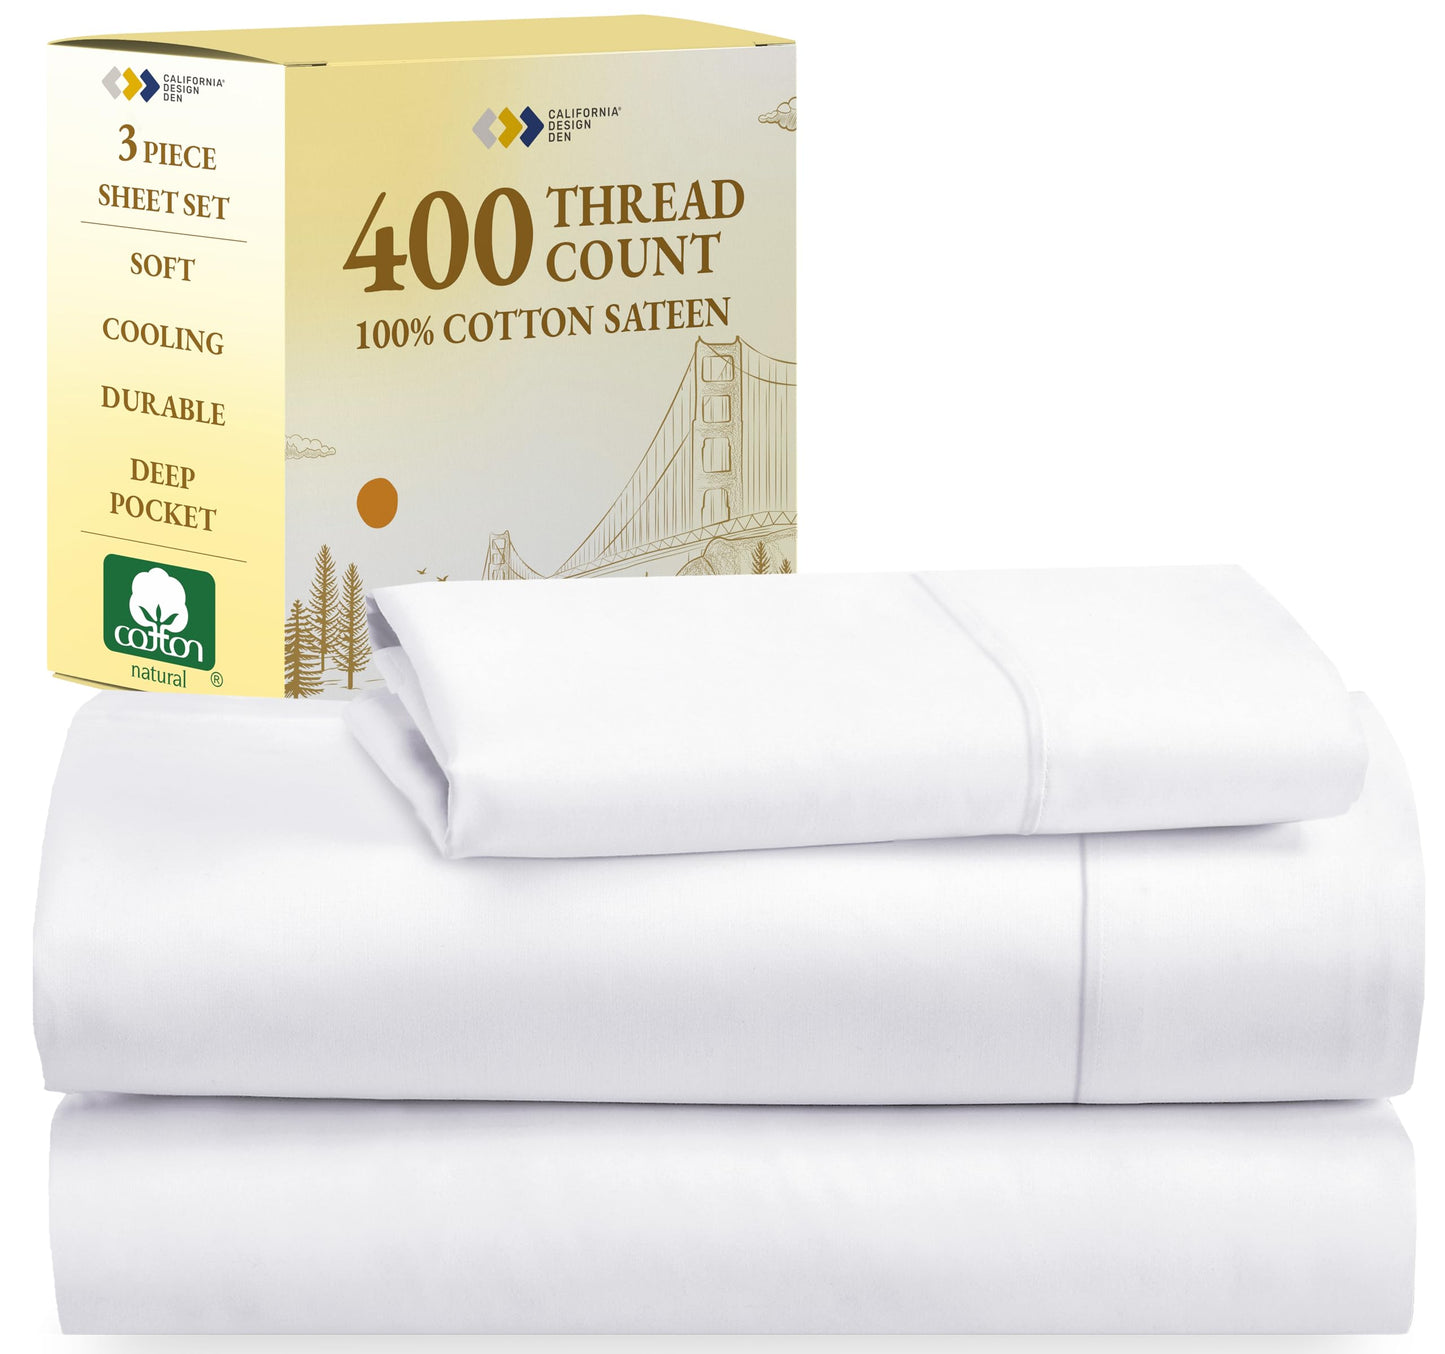 California Design Den Twin XL Sheets Set, Natural 100% Cotton Sheets, Soft Luxury 400 Thread Count Sateen, 3 Pc Dorm Rooms & Adults, Cooling Sheets (Bright White Sheets)